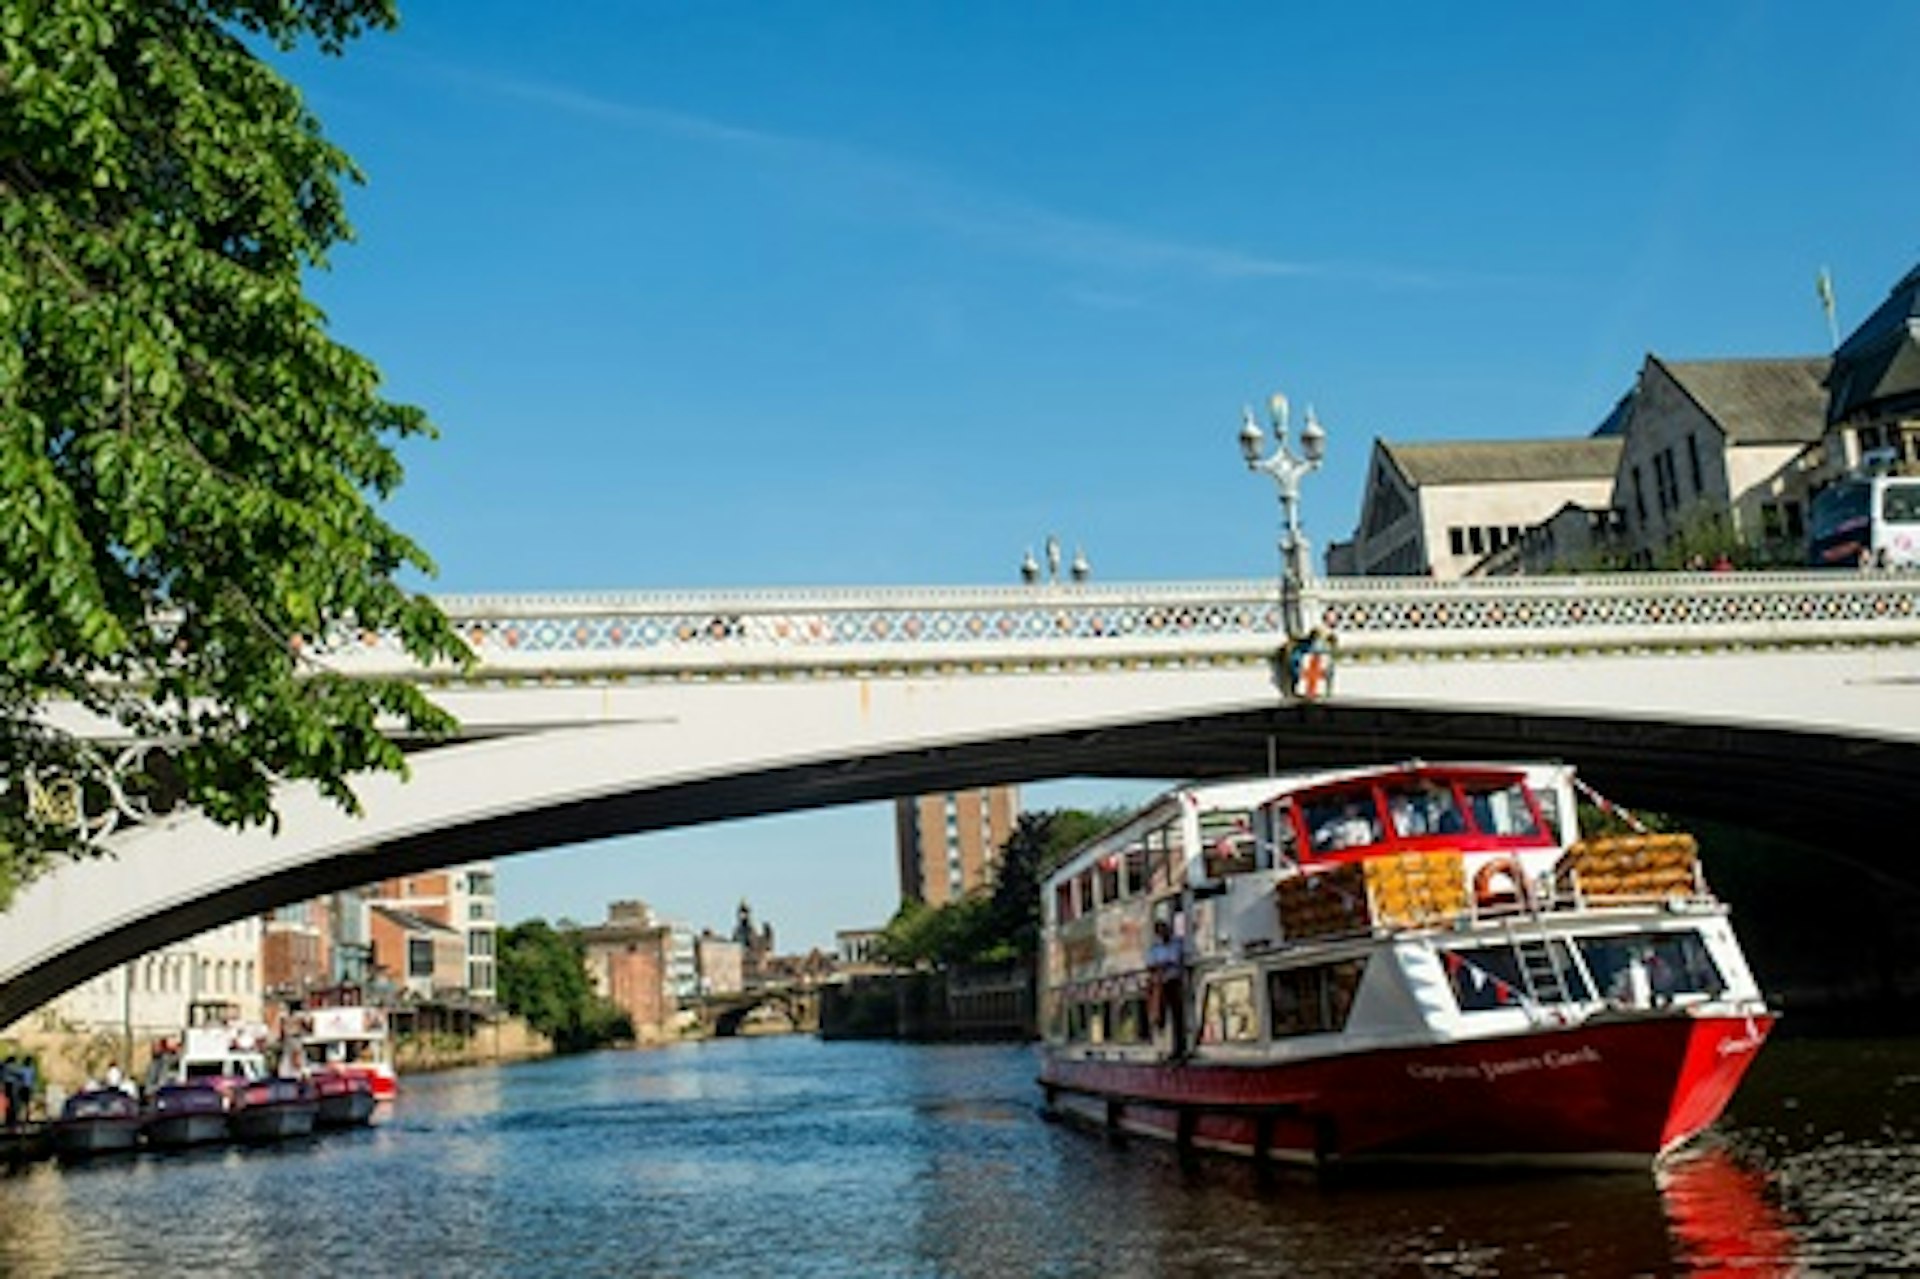 City of York Lunch River Cruise for Two 2